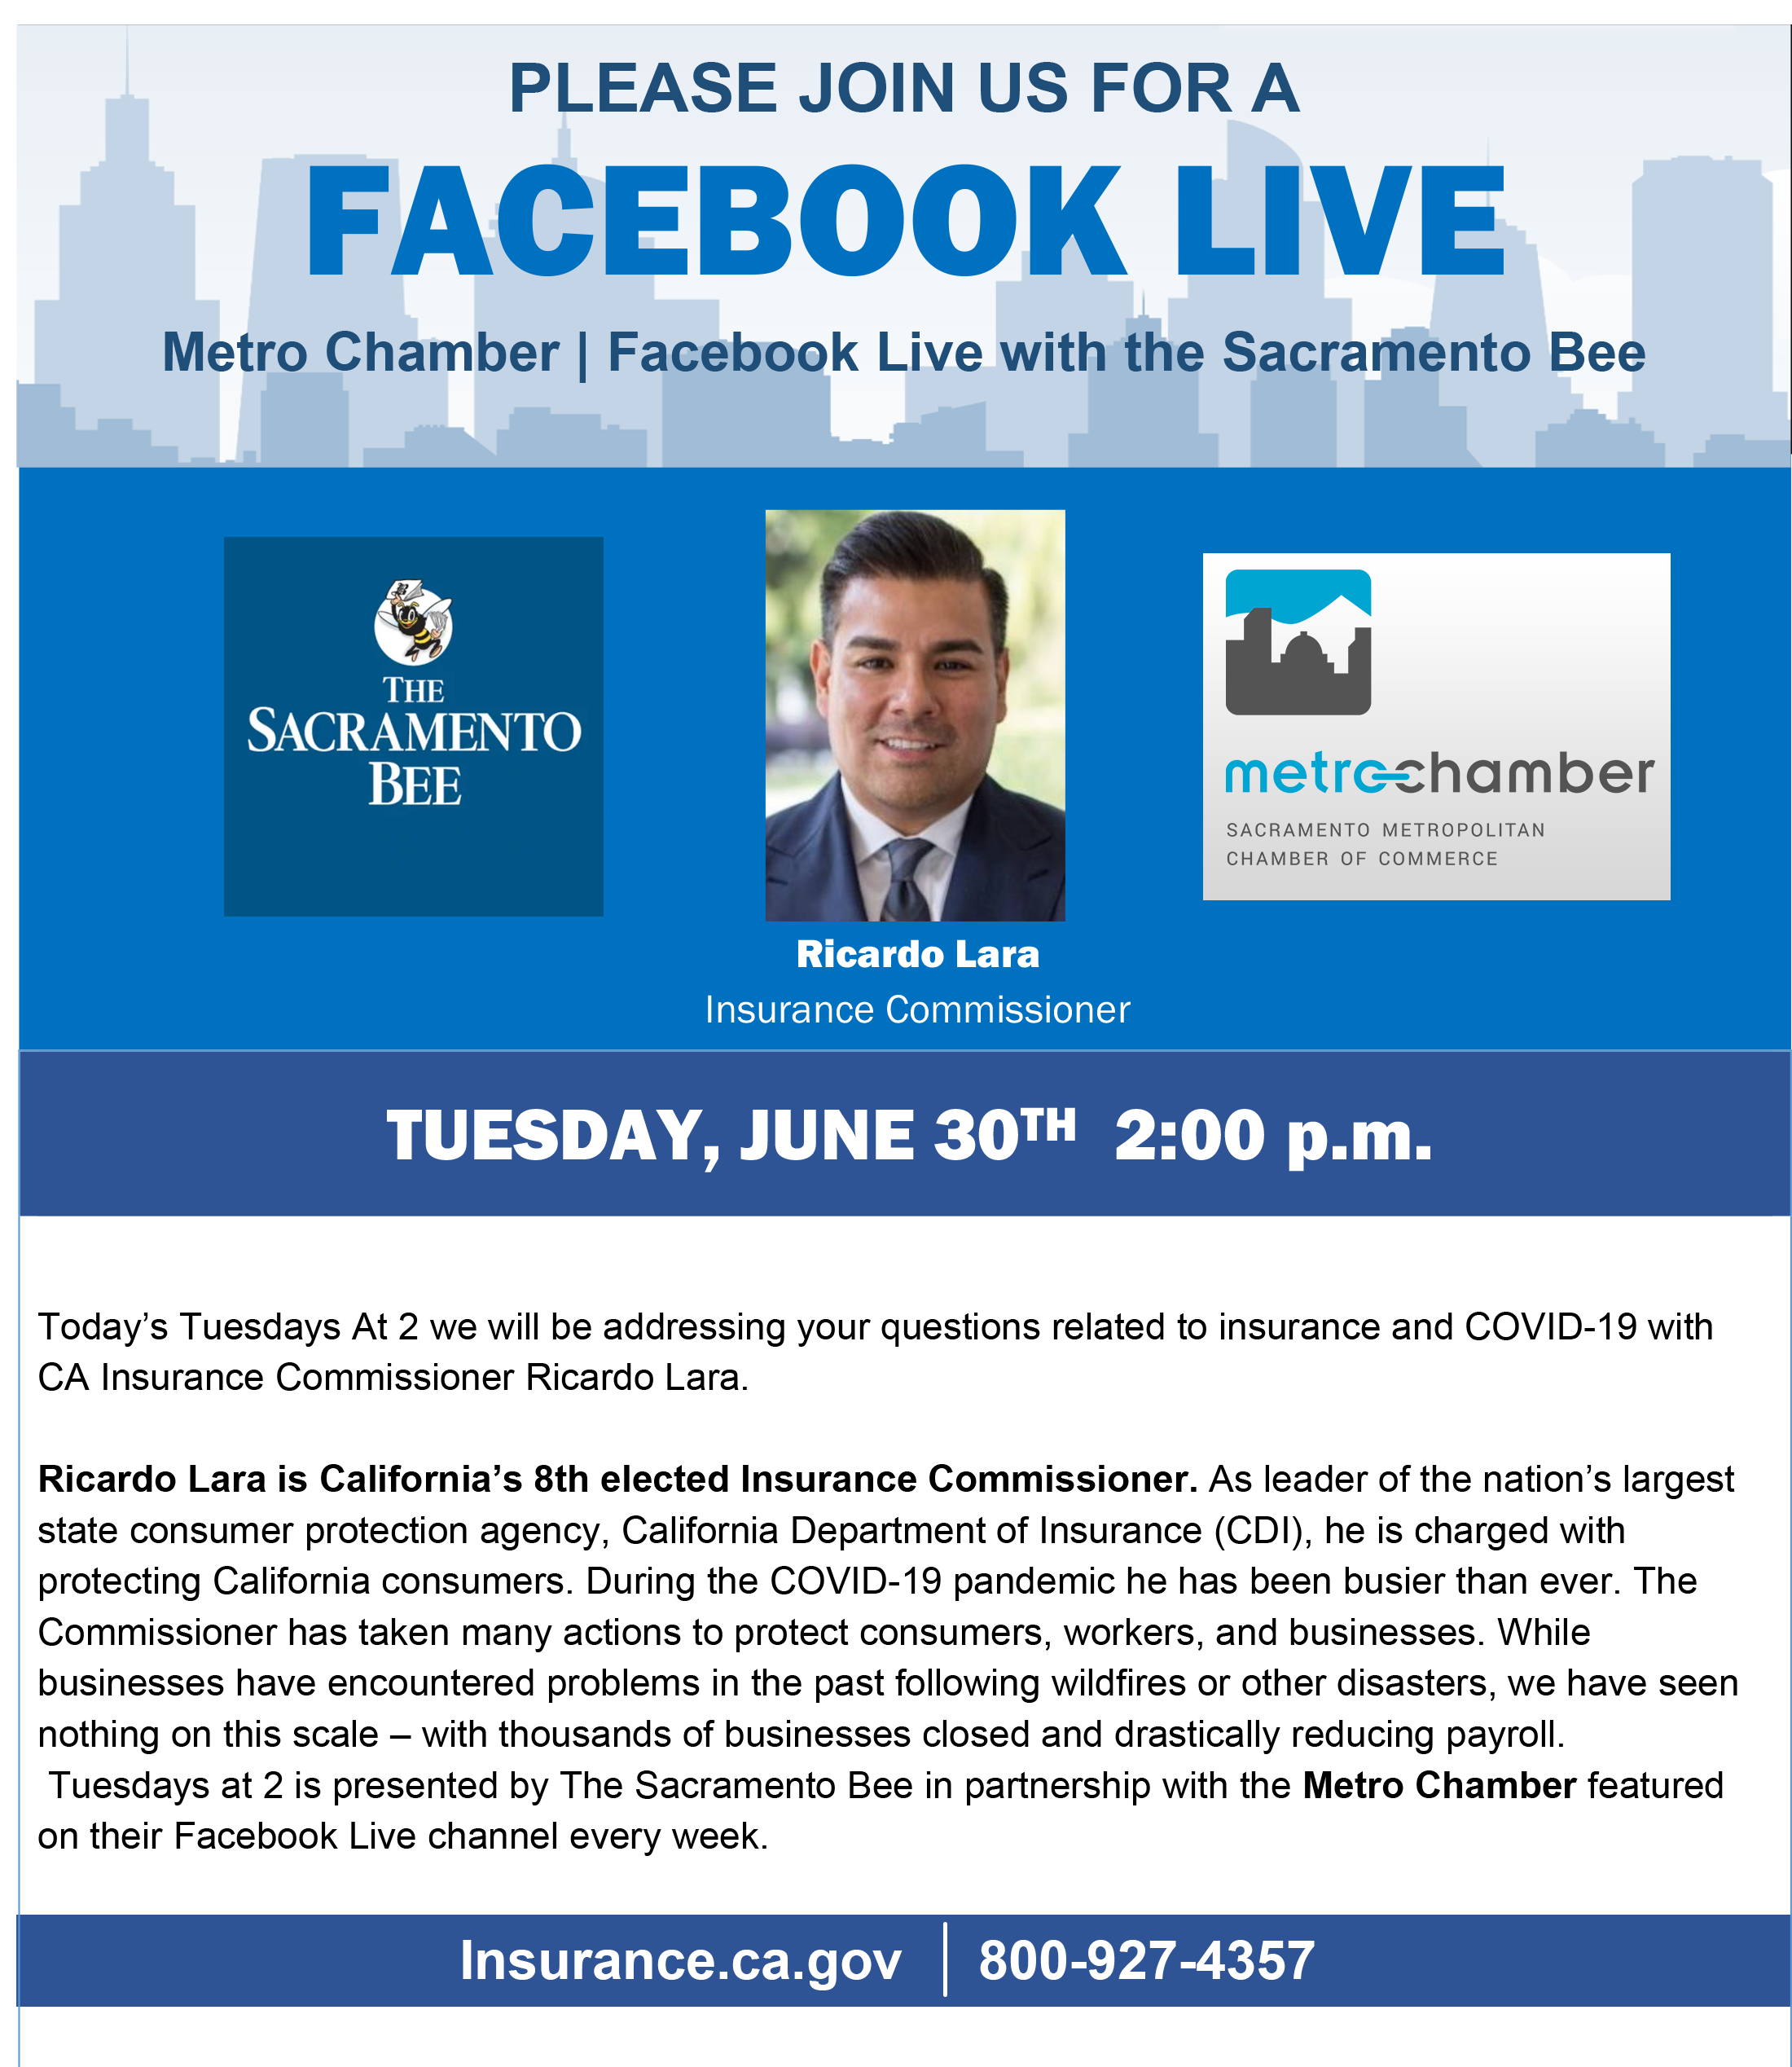 June 30th, 2020 on Tuesdays At 2 we addressed your questions related to insurance and COVID-19 with CA Insurance Commissioner Ricardo Lara. The Commissioner has taken many actions to protect consumers, workers, and businesses. 